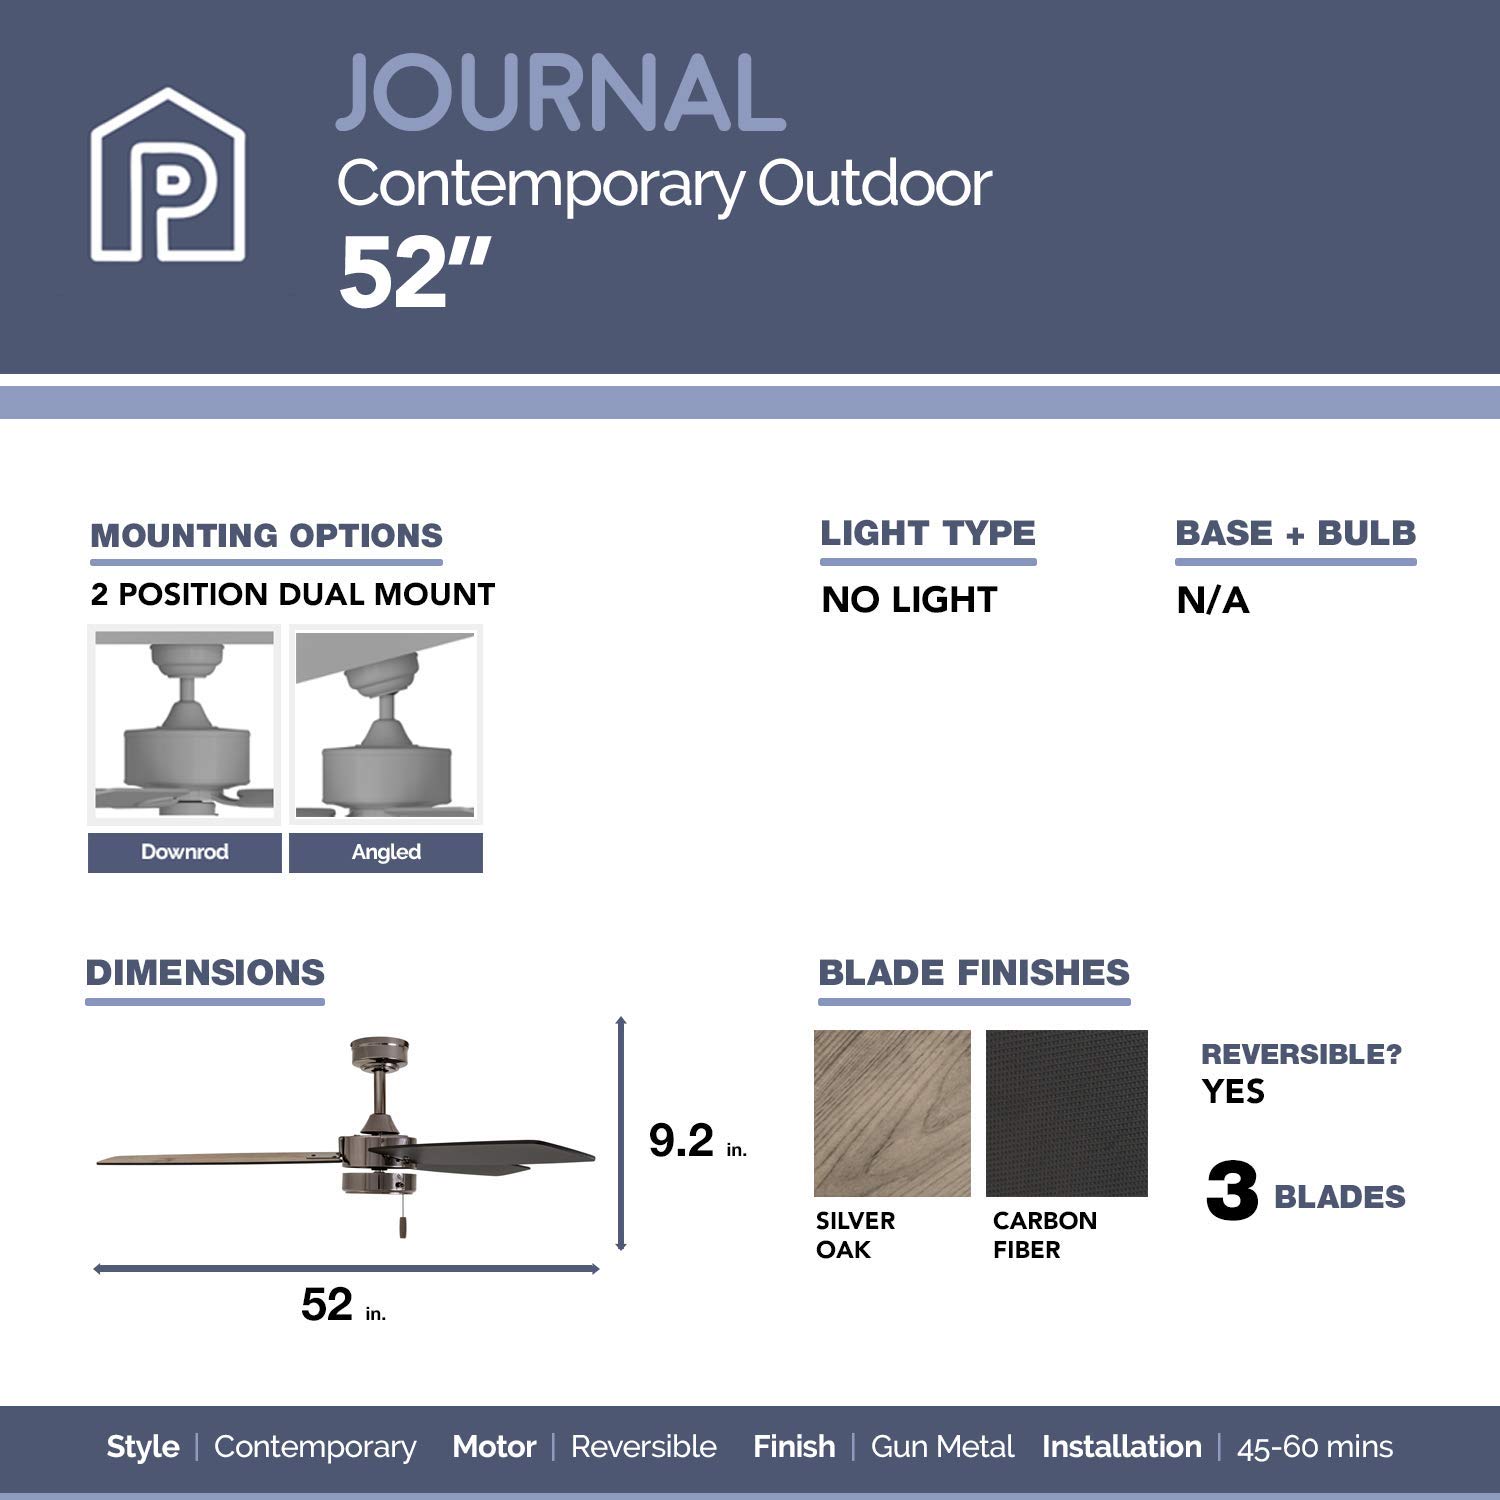 52 Inch Journal, Gun Metal, Pull Chain, Indoor/Outdoor Ceiling Fan by Prominence Home